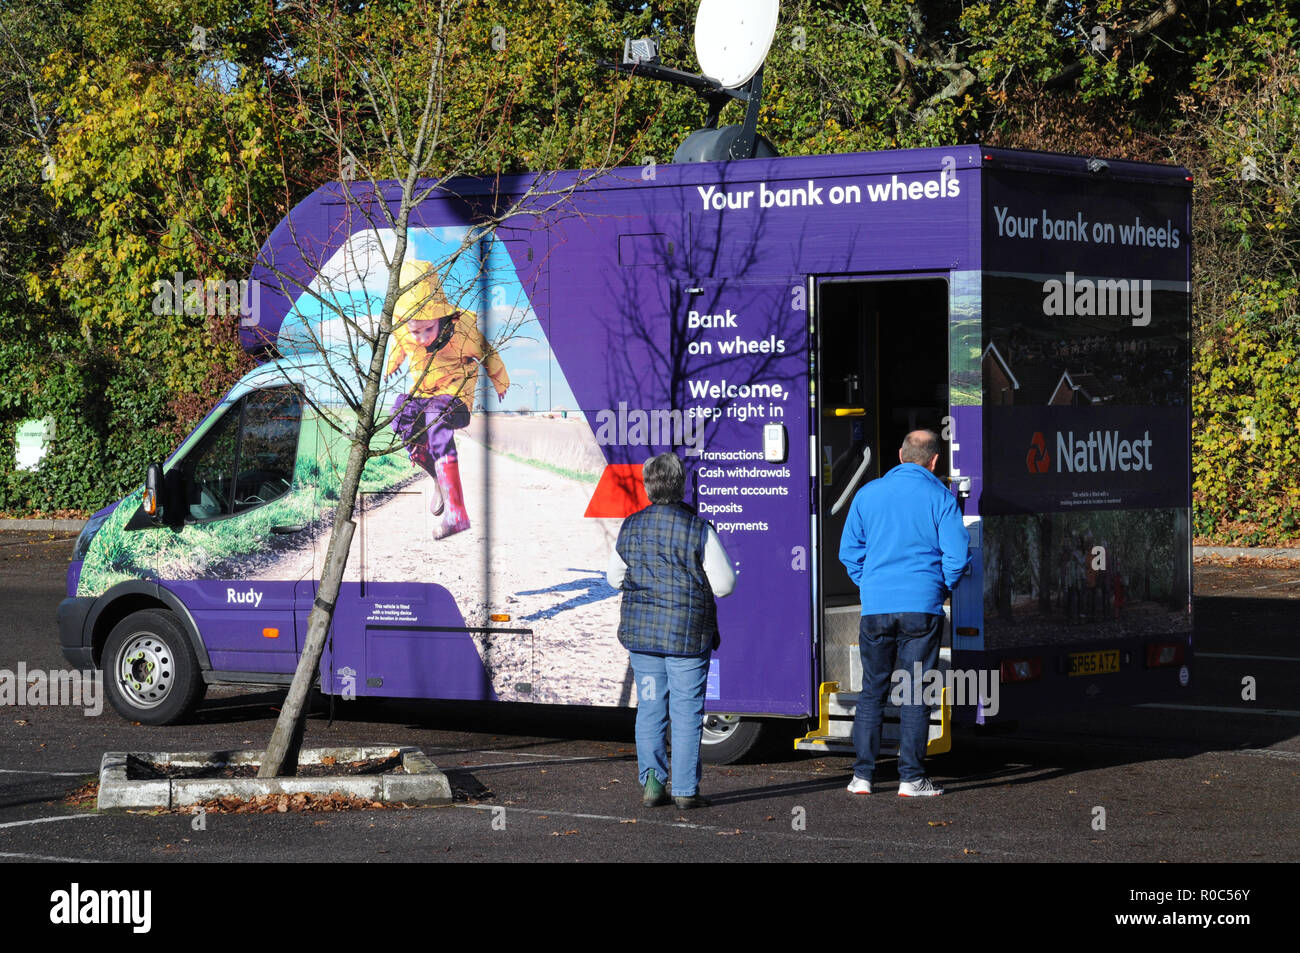 Natwest Bank's answer to the closure of some of its local branches in East Sussex. This mobile banking service calls once a week. Stock Photo